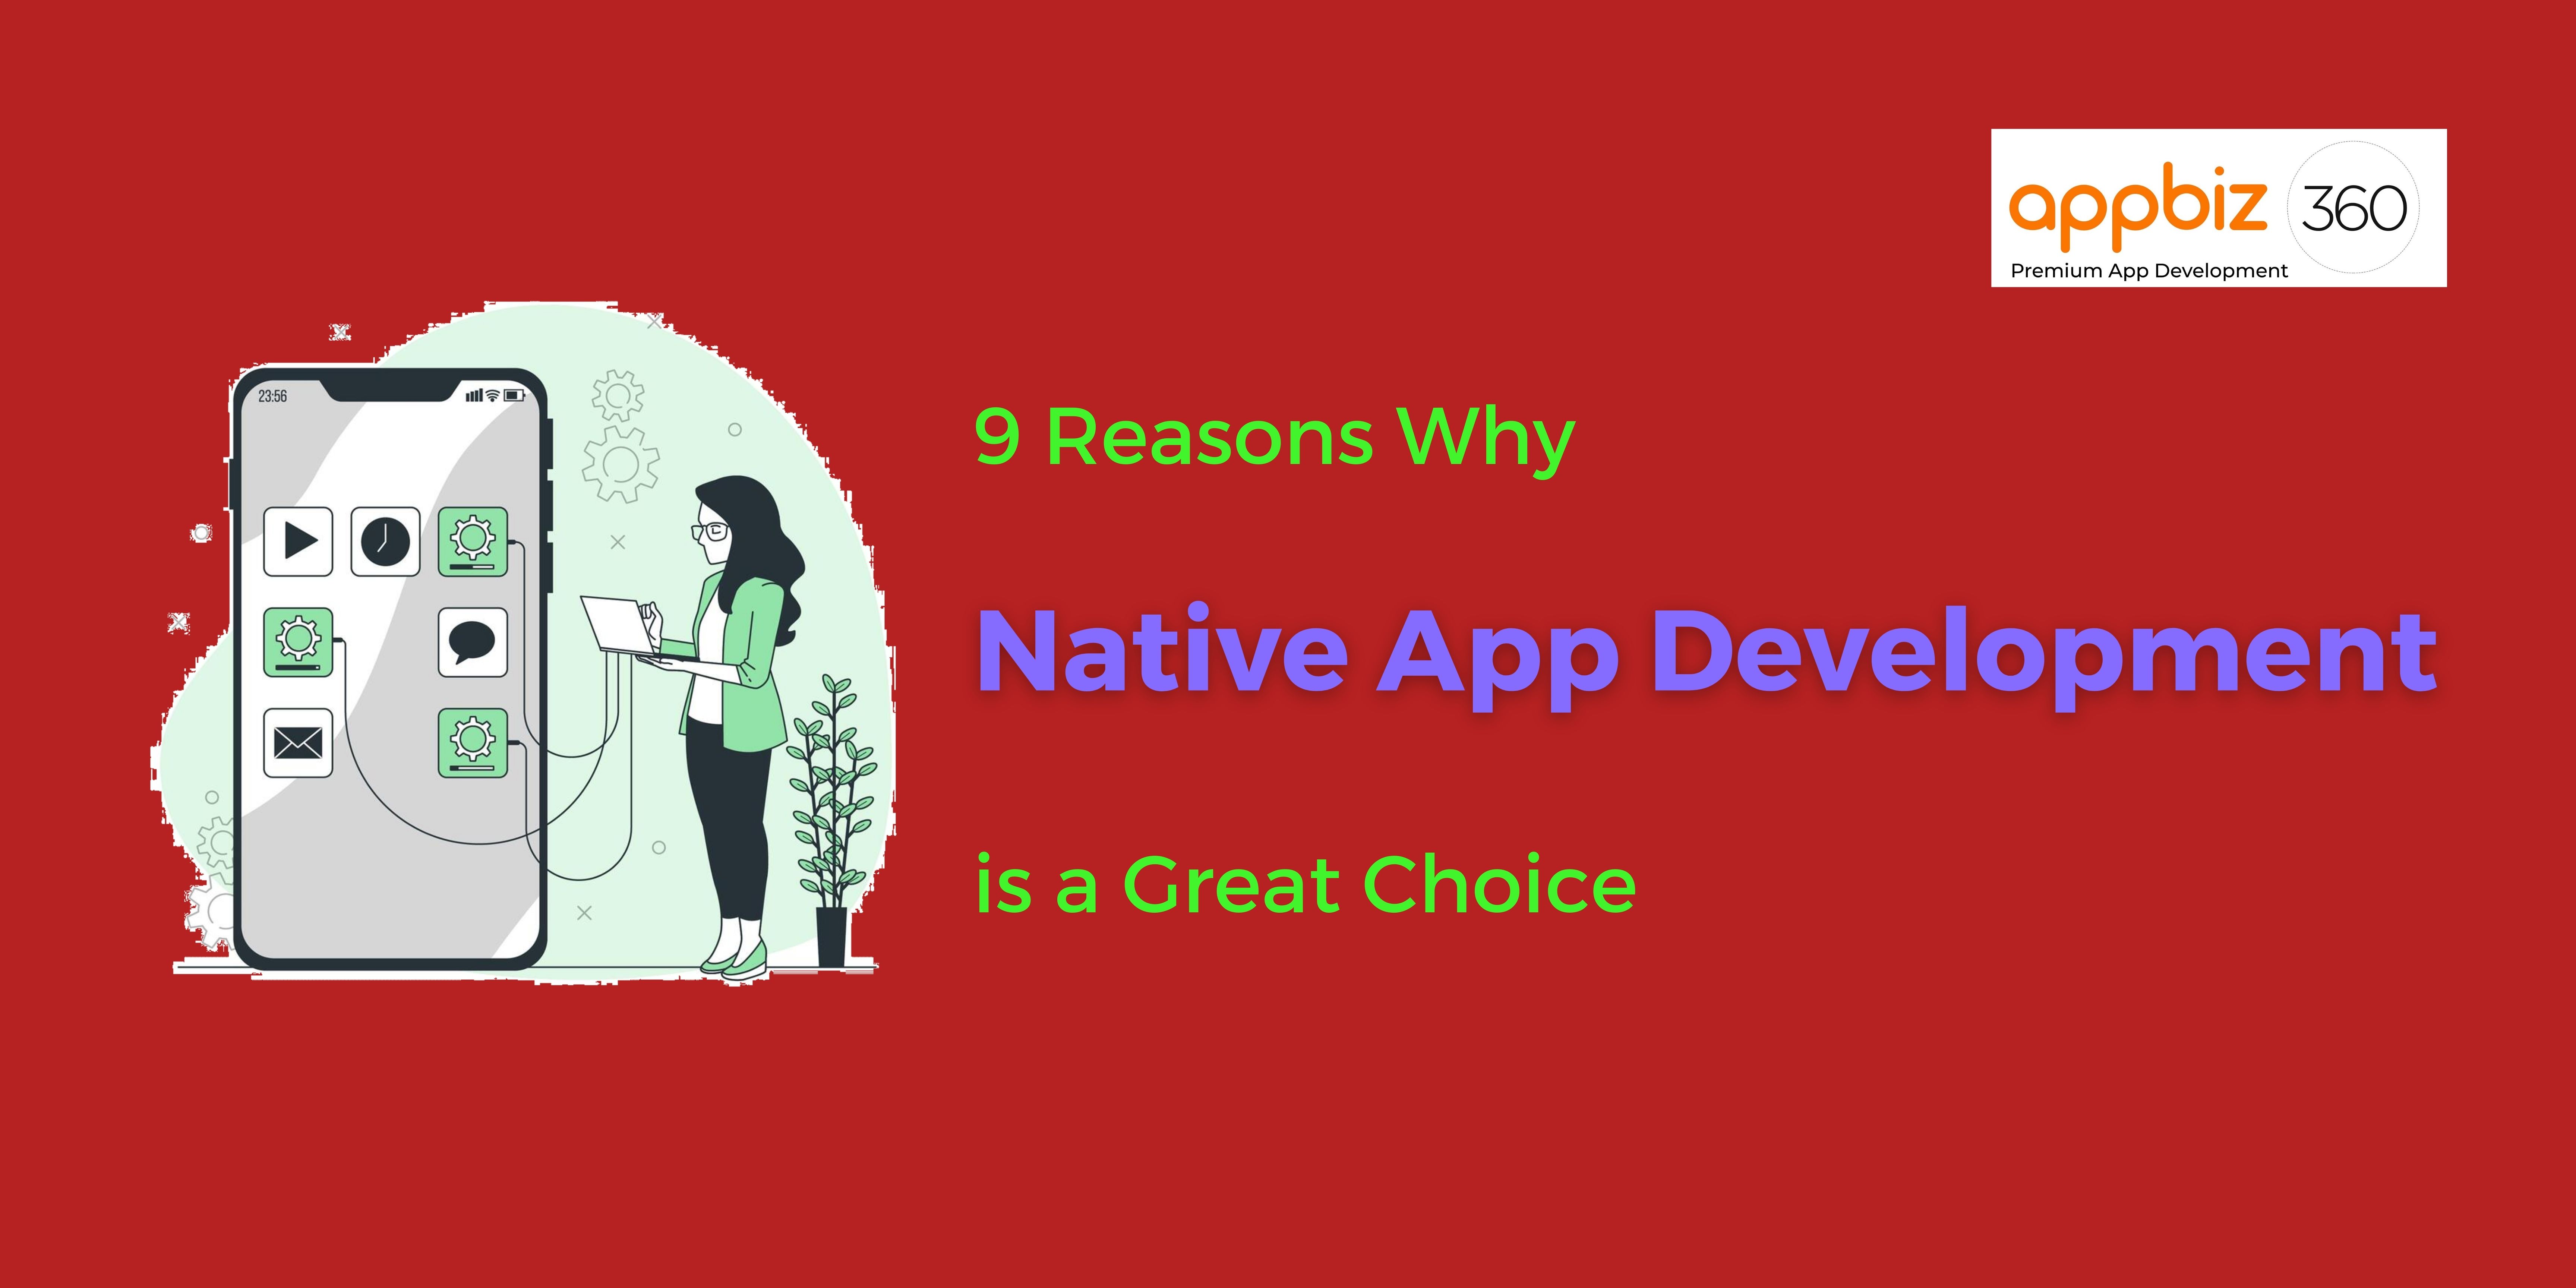 9 Reasons Why Native App Development is a Great Choice